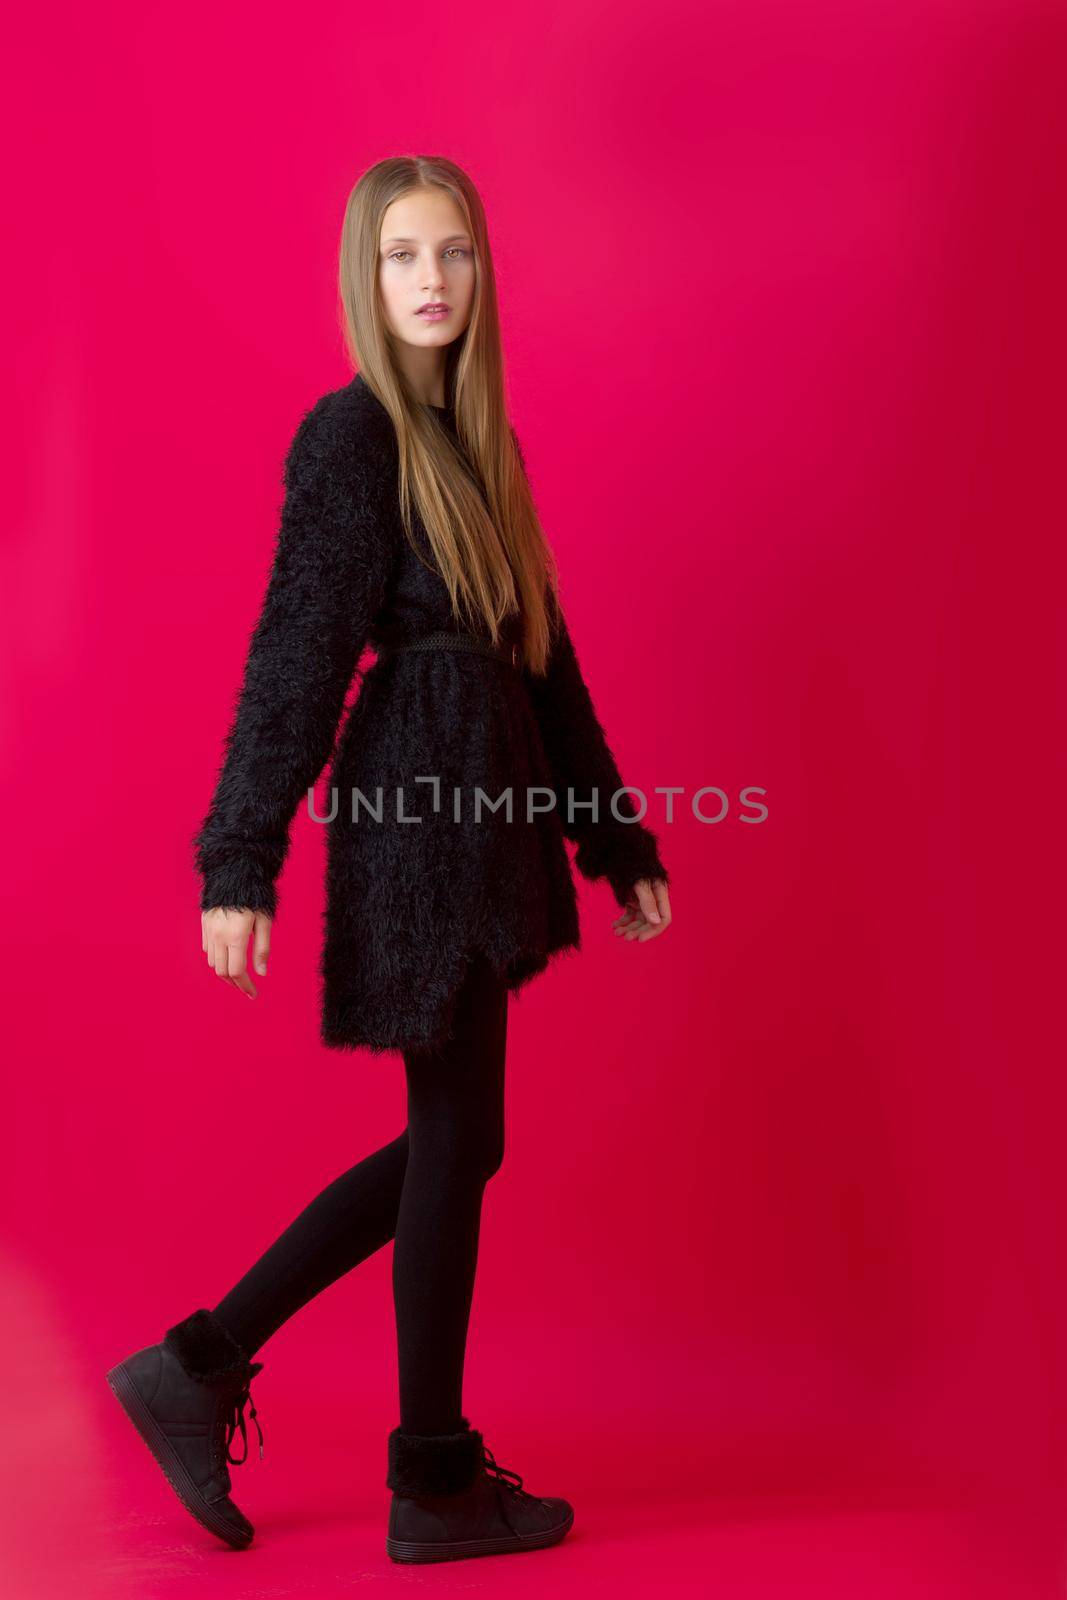 Beautiful stylish teenage girl in black outfit. Full length portrait of pretty girl with long brown straight hair wearing black dress, stockings and boots standing on red background in studio